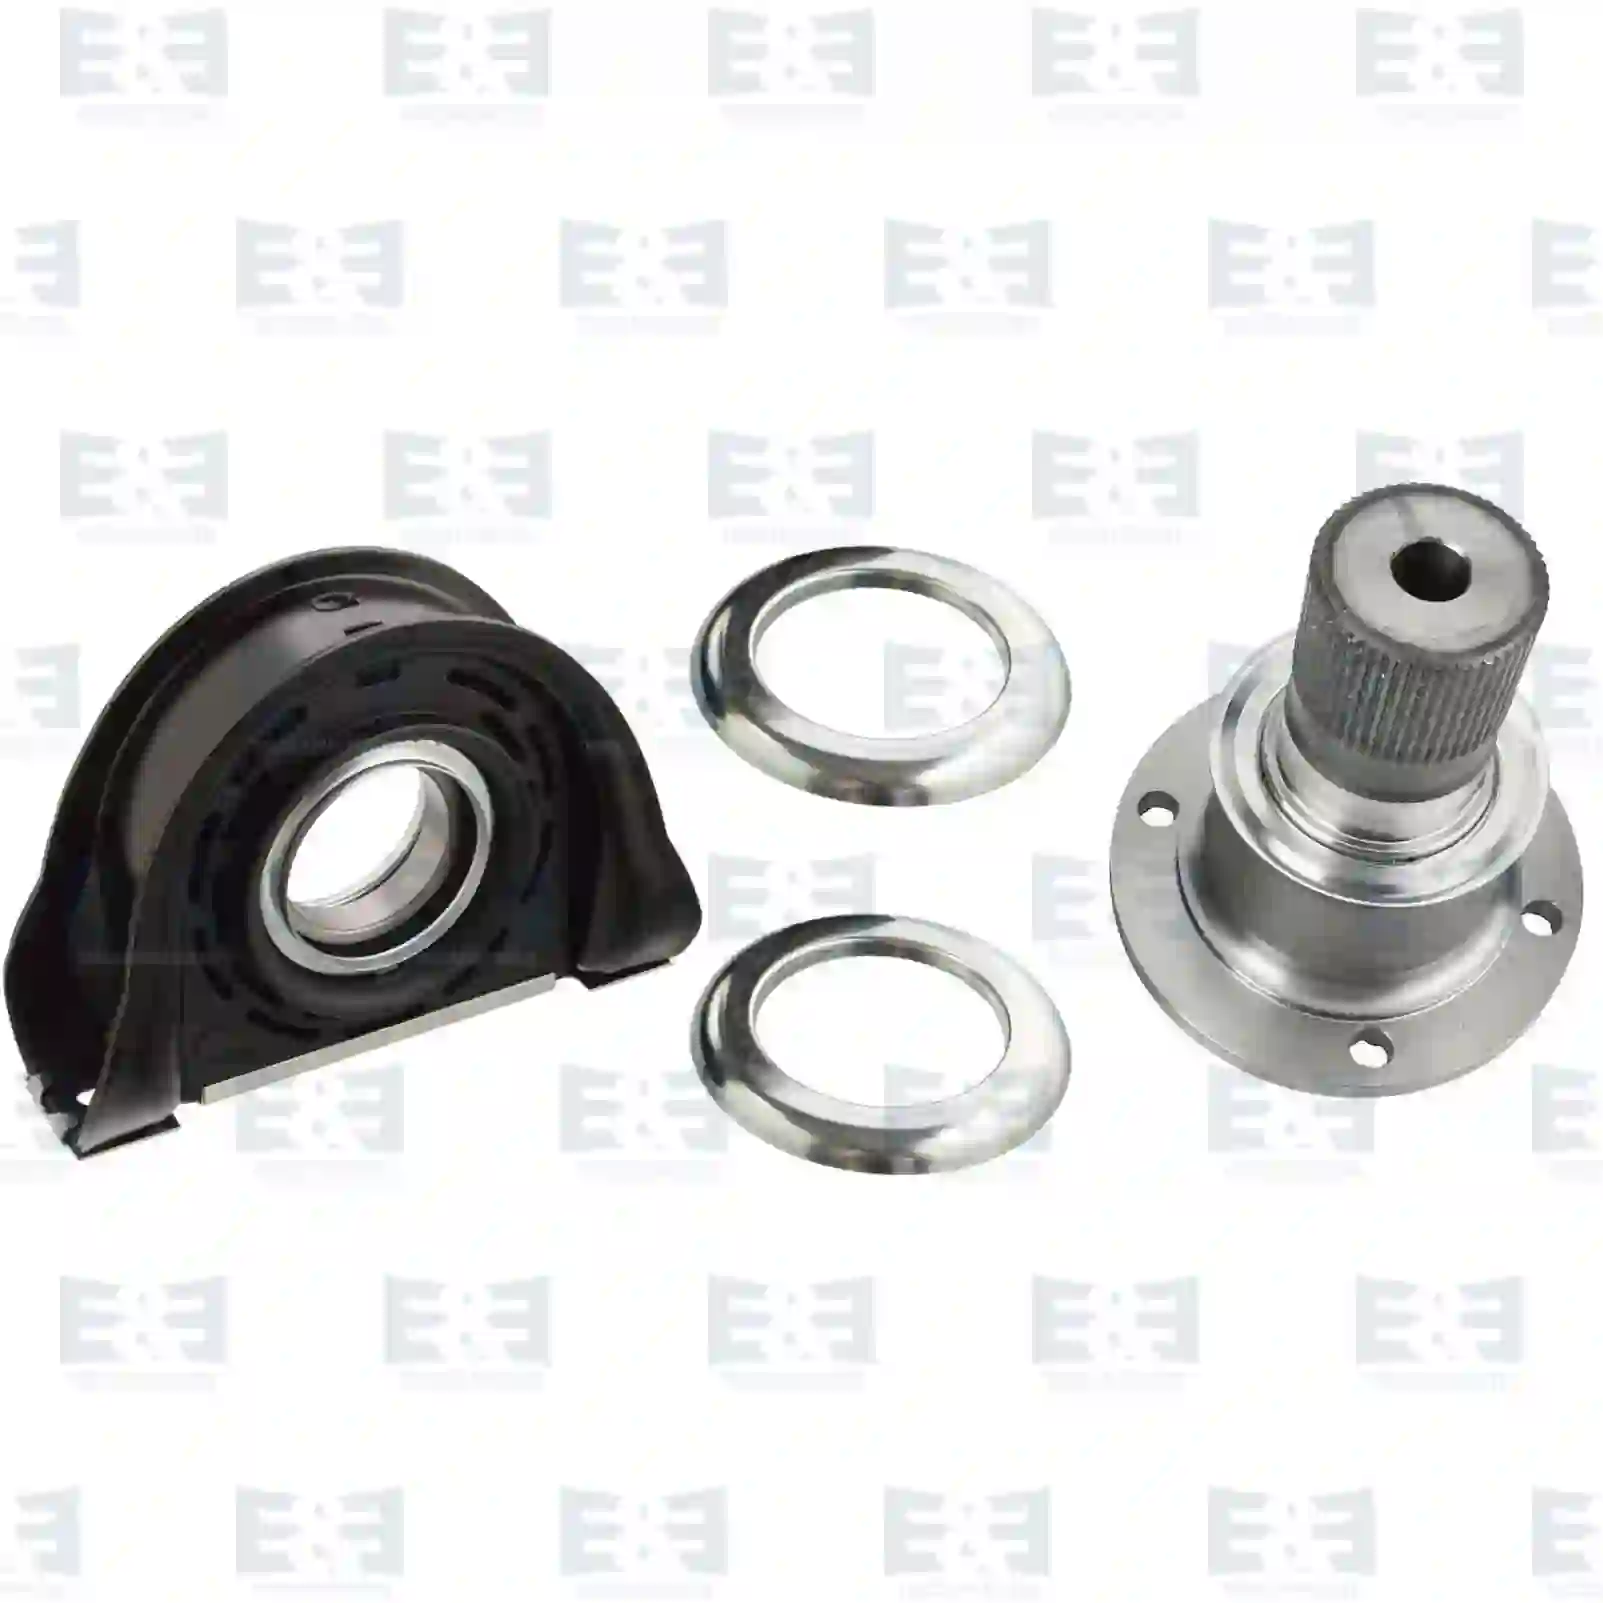 Support Bearing Center bearing kit, EE No 2E2276880 ,  oem no:7421096141, 21096141, ZG02514-0008 E&E Truck Spare Parts | Truck Spare Parts, Auotomotive Spare Parts